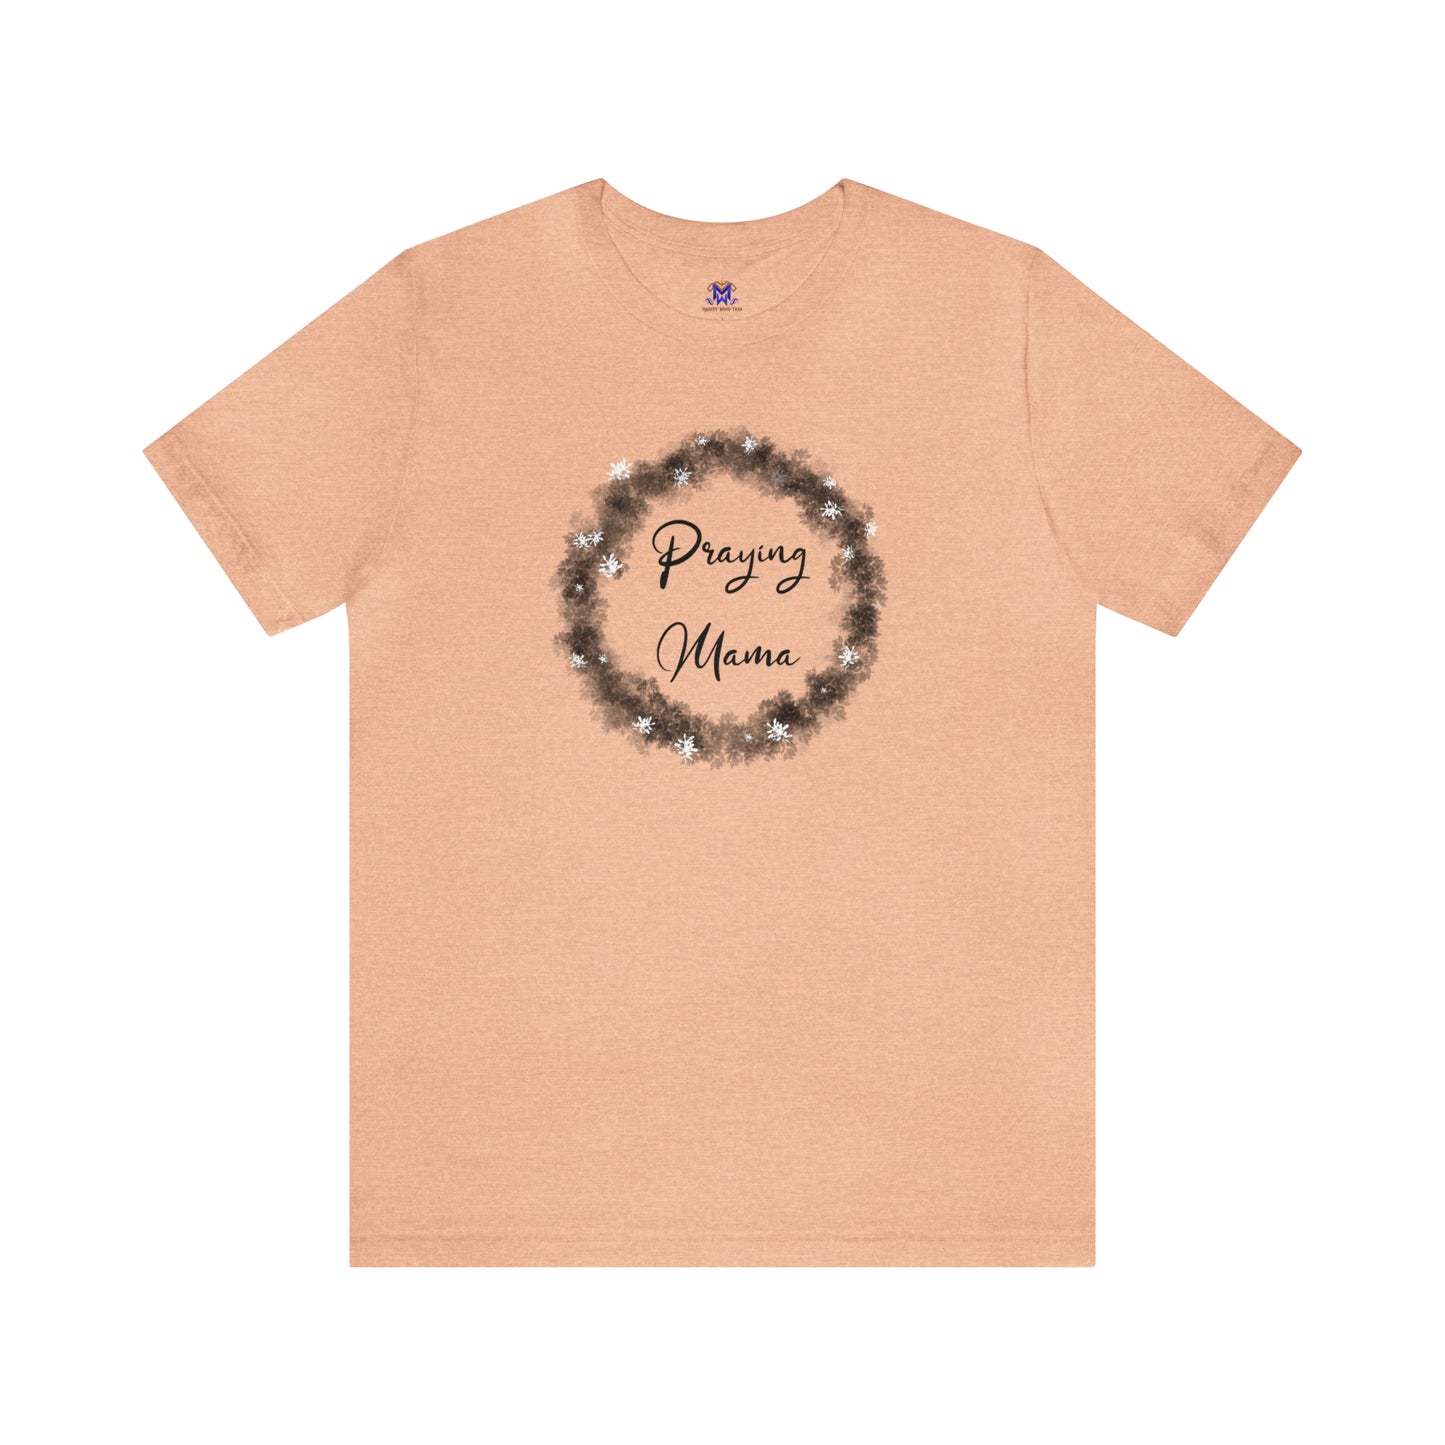 Praying Mama (Available in more colors)